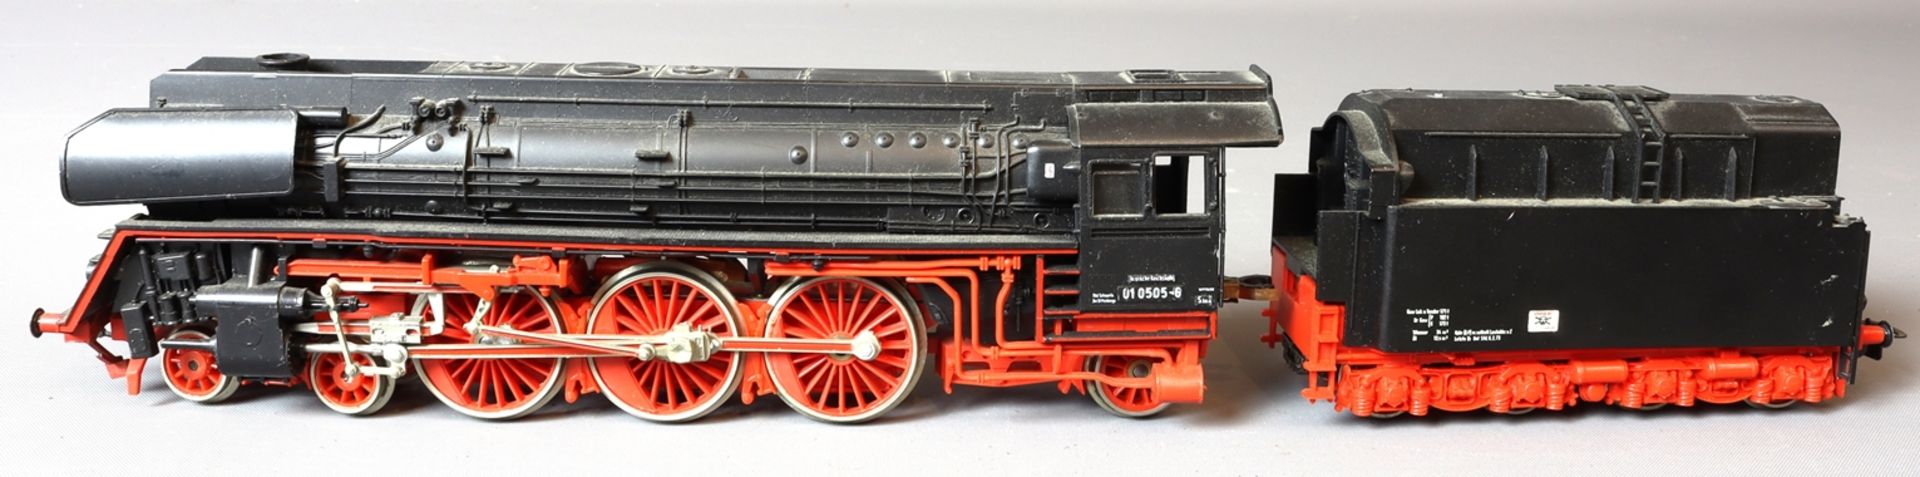 Piko steam locomotive with tender 01 0505-6, second half of the 20th century, German - Image 2 of 3